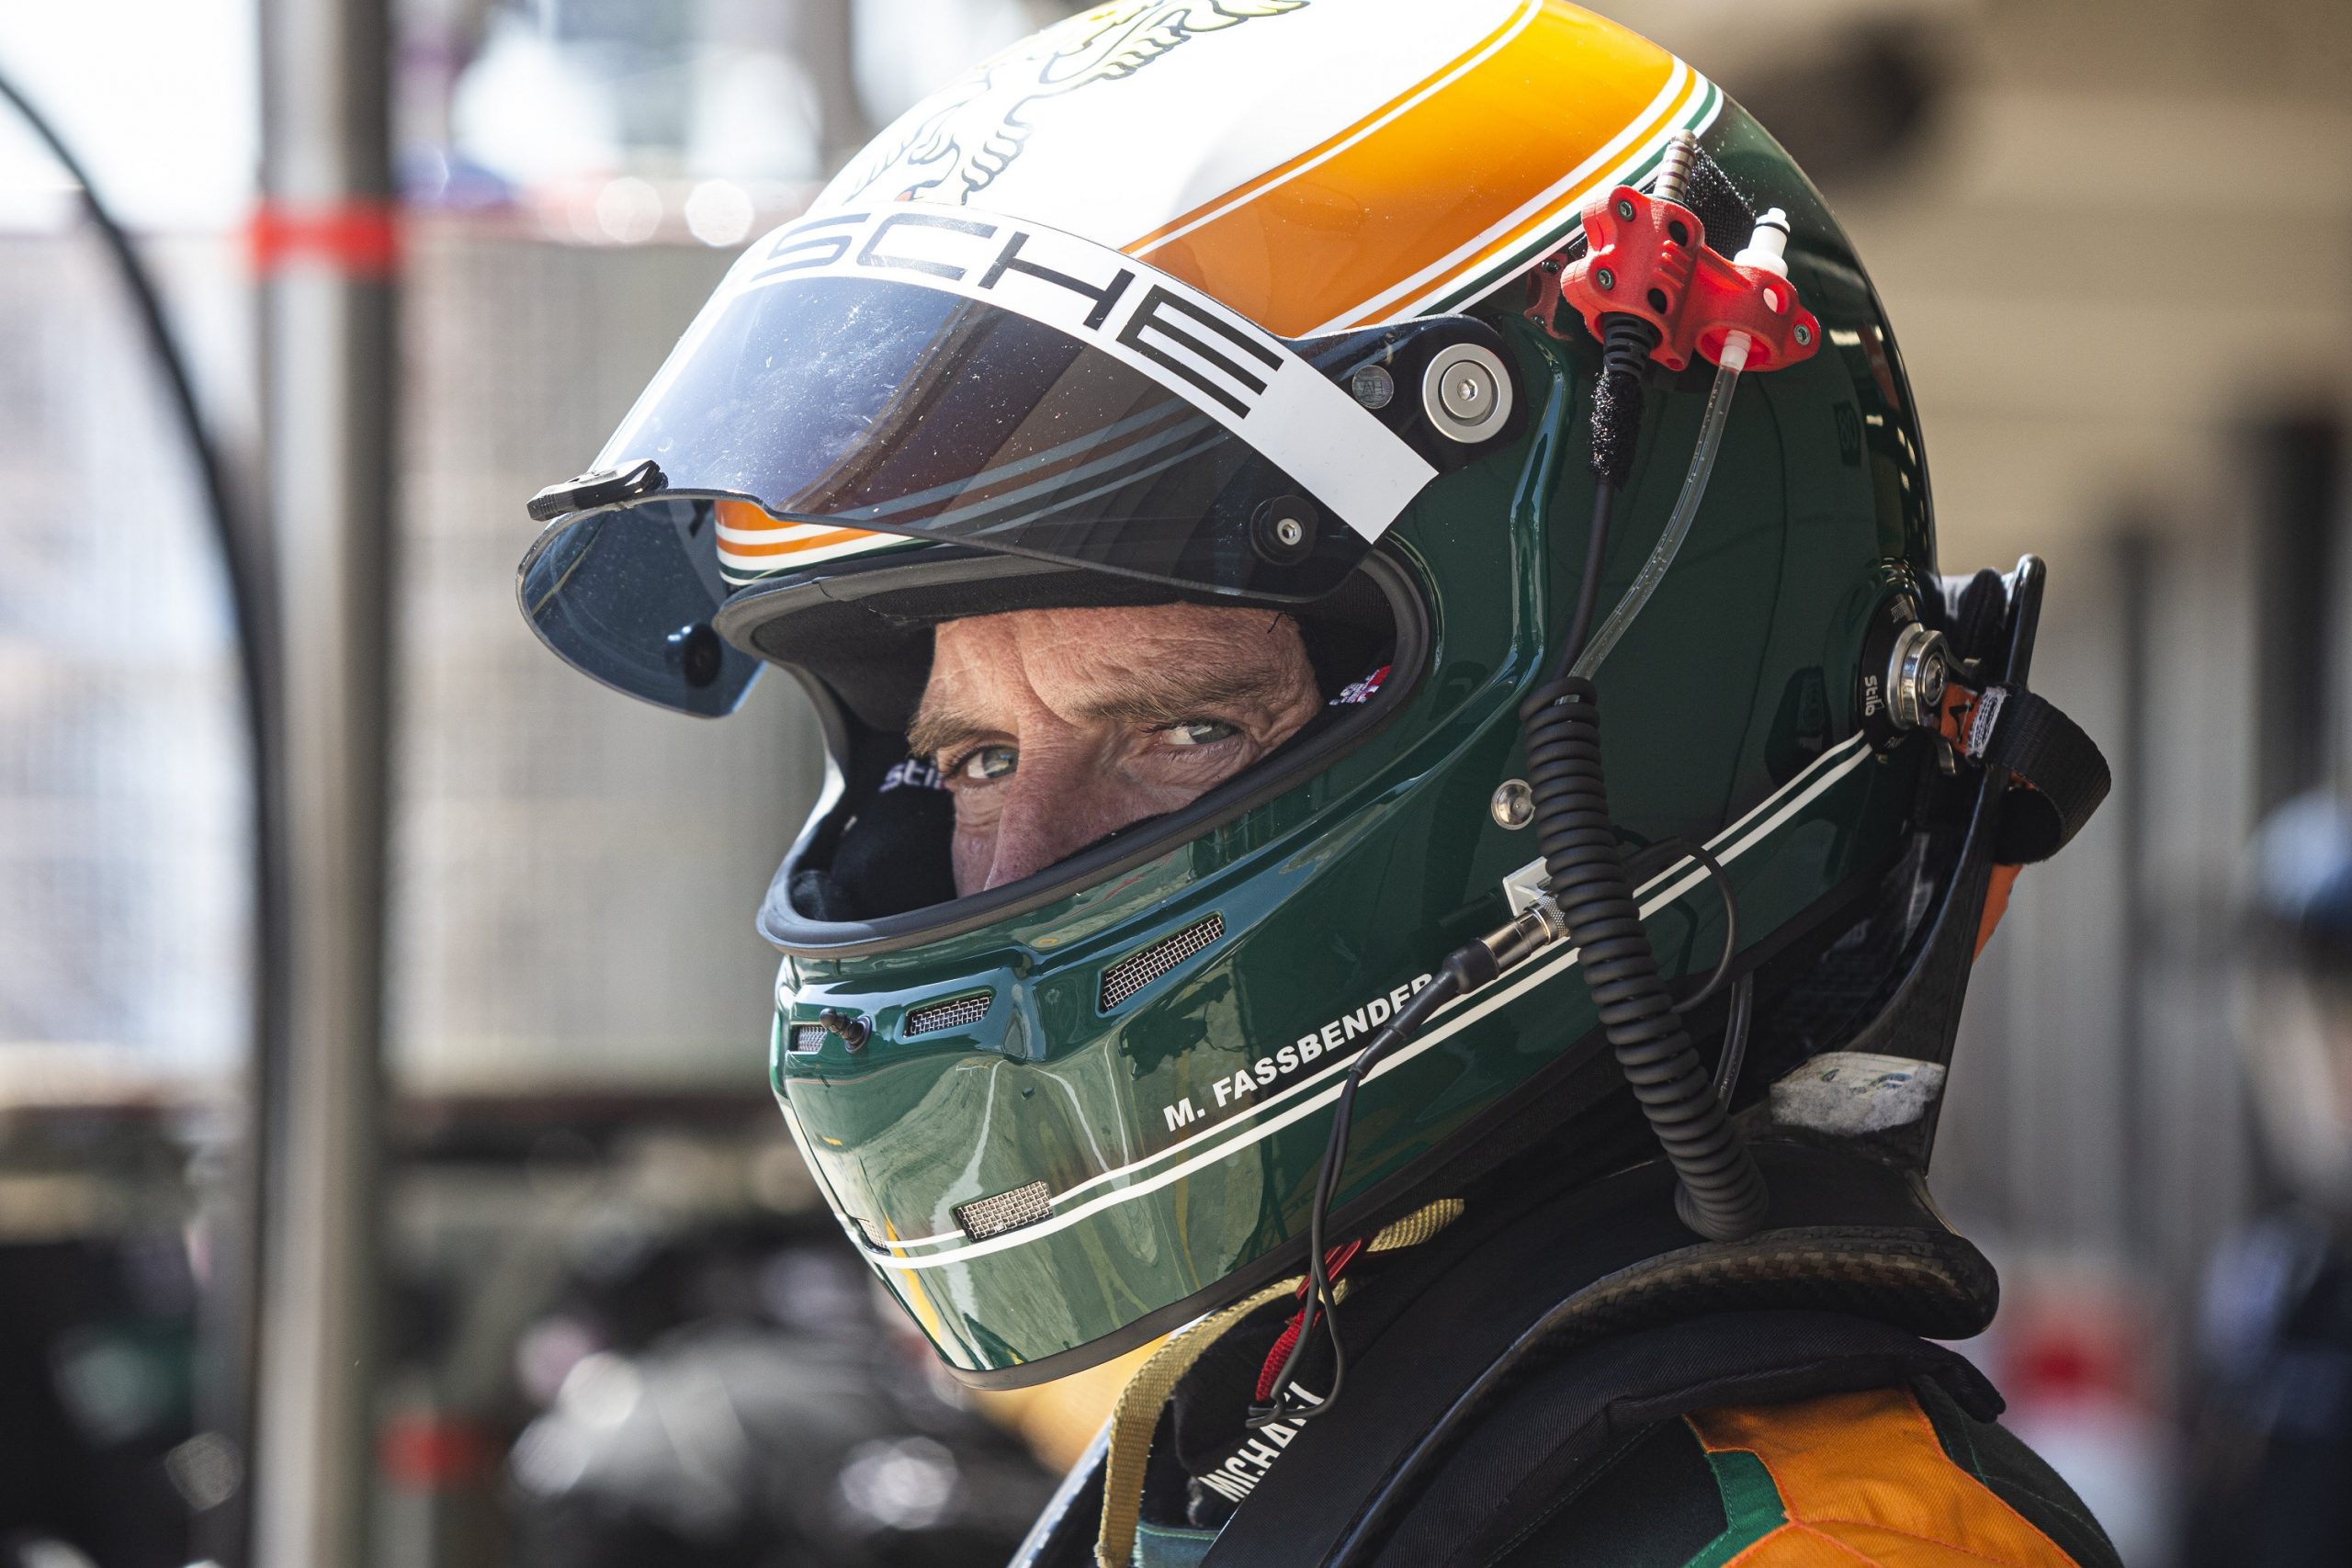 Michael Fassbender in a green and yellow race helmet during a practice session in Barcelona